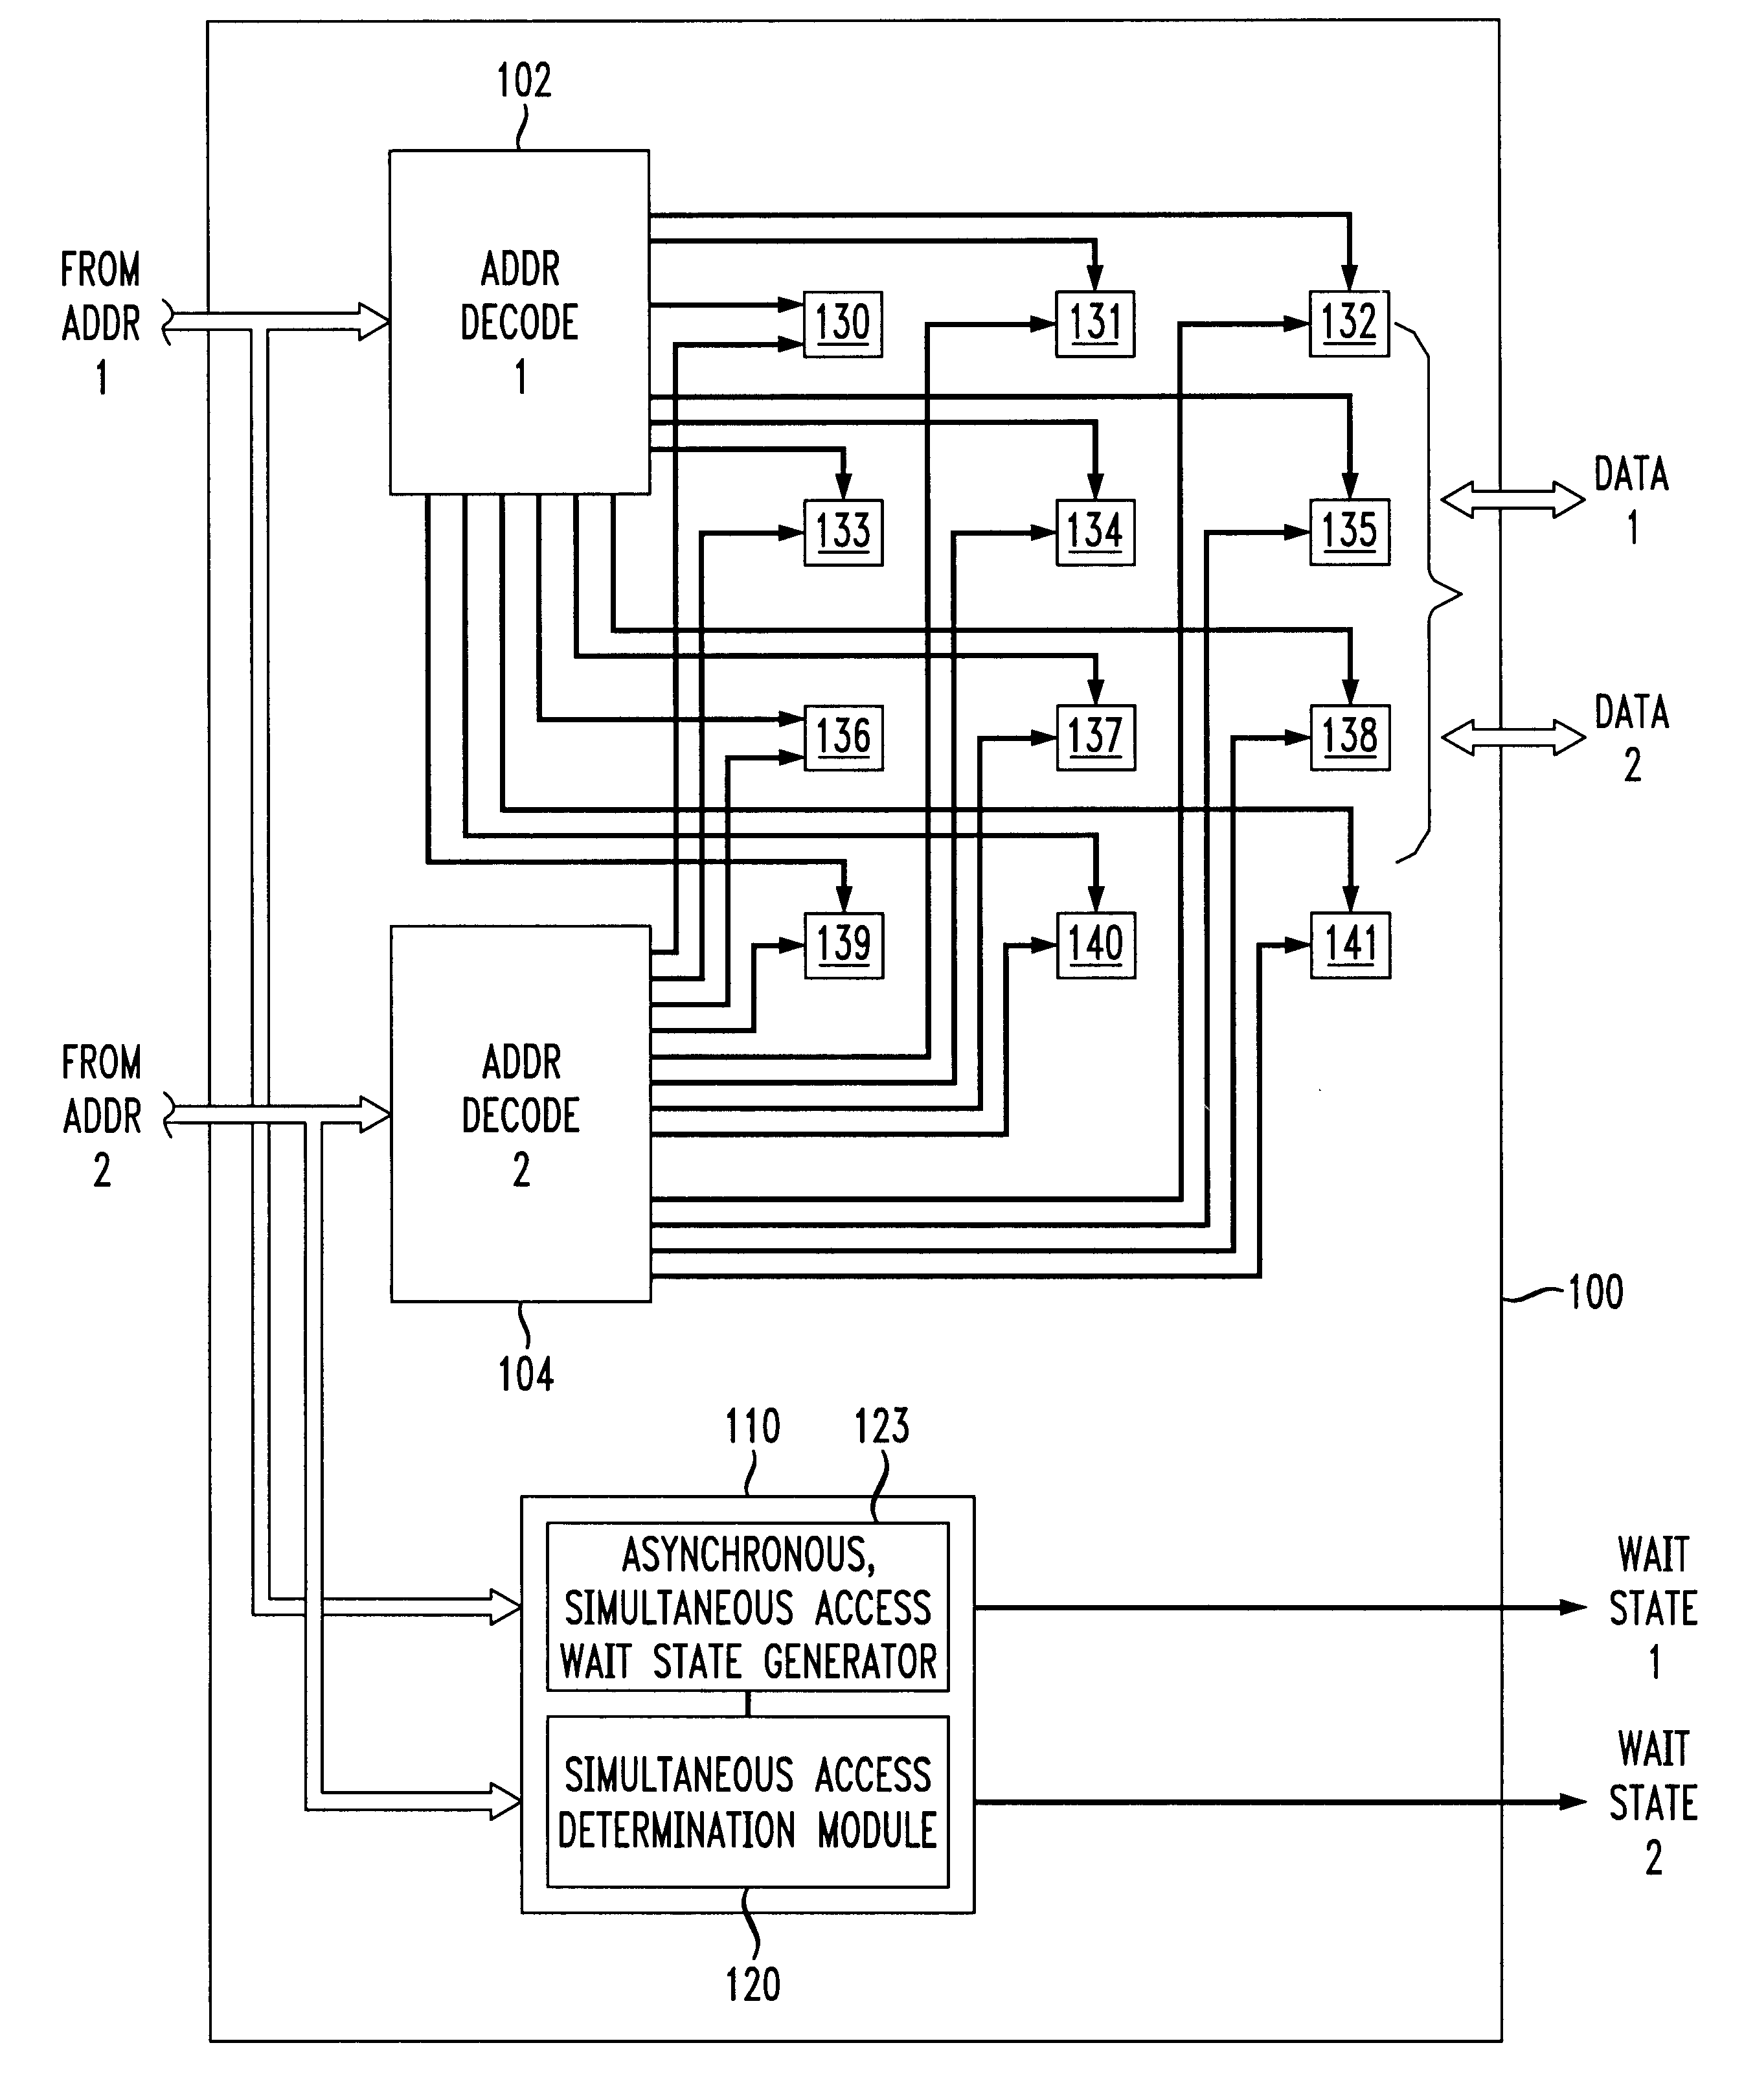 Wait state generator circuit and method to allow asynchronous, simultaneous access by two processors